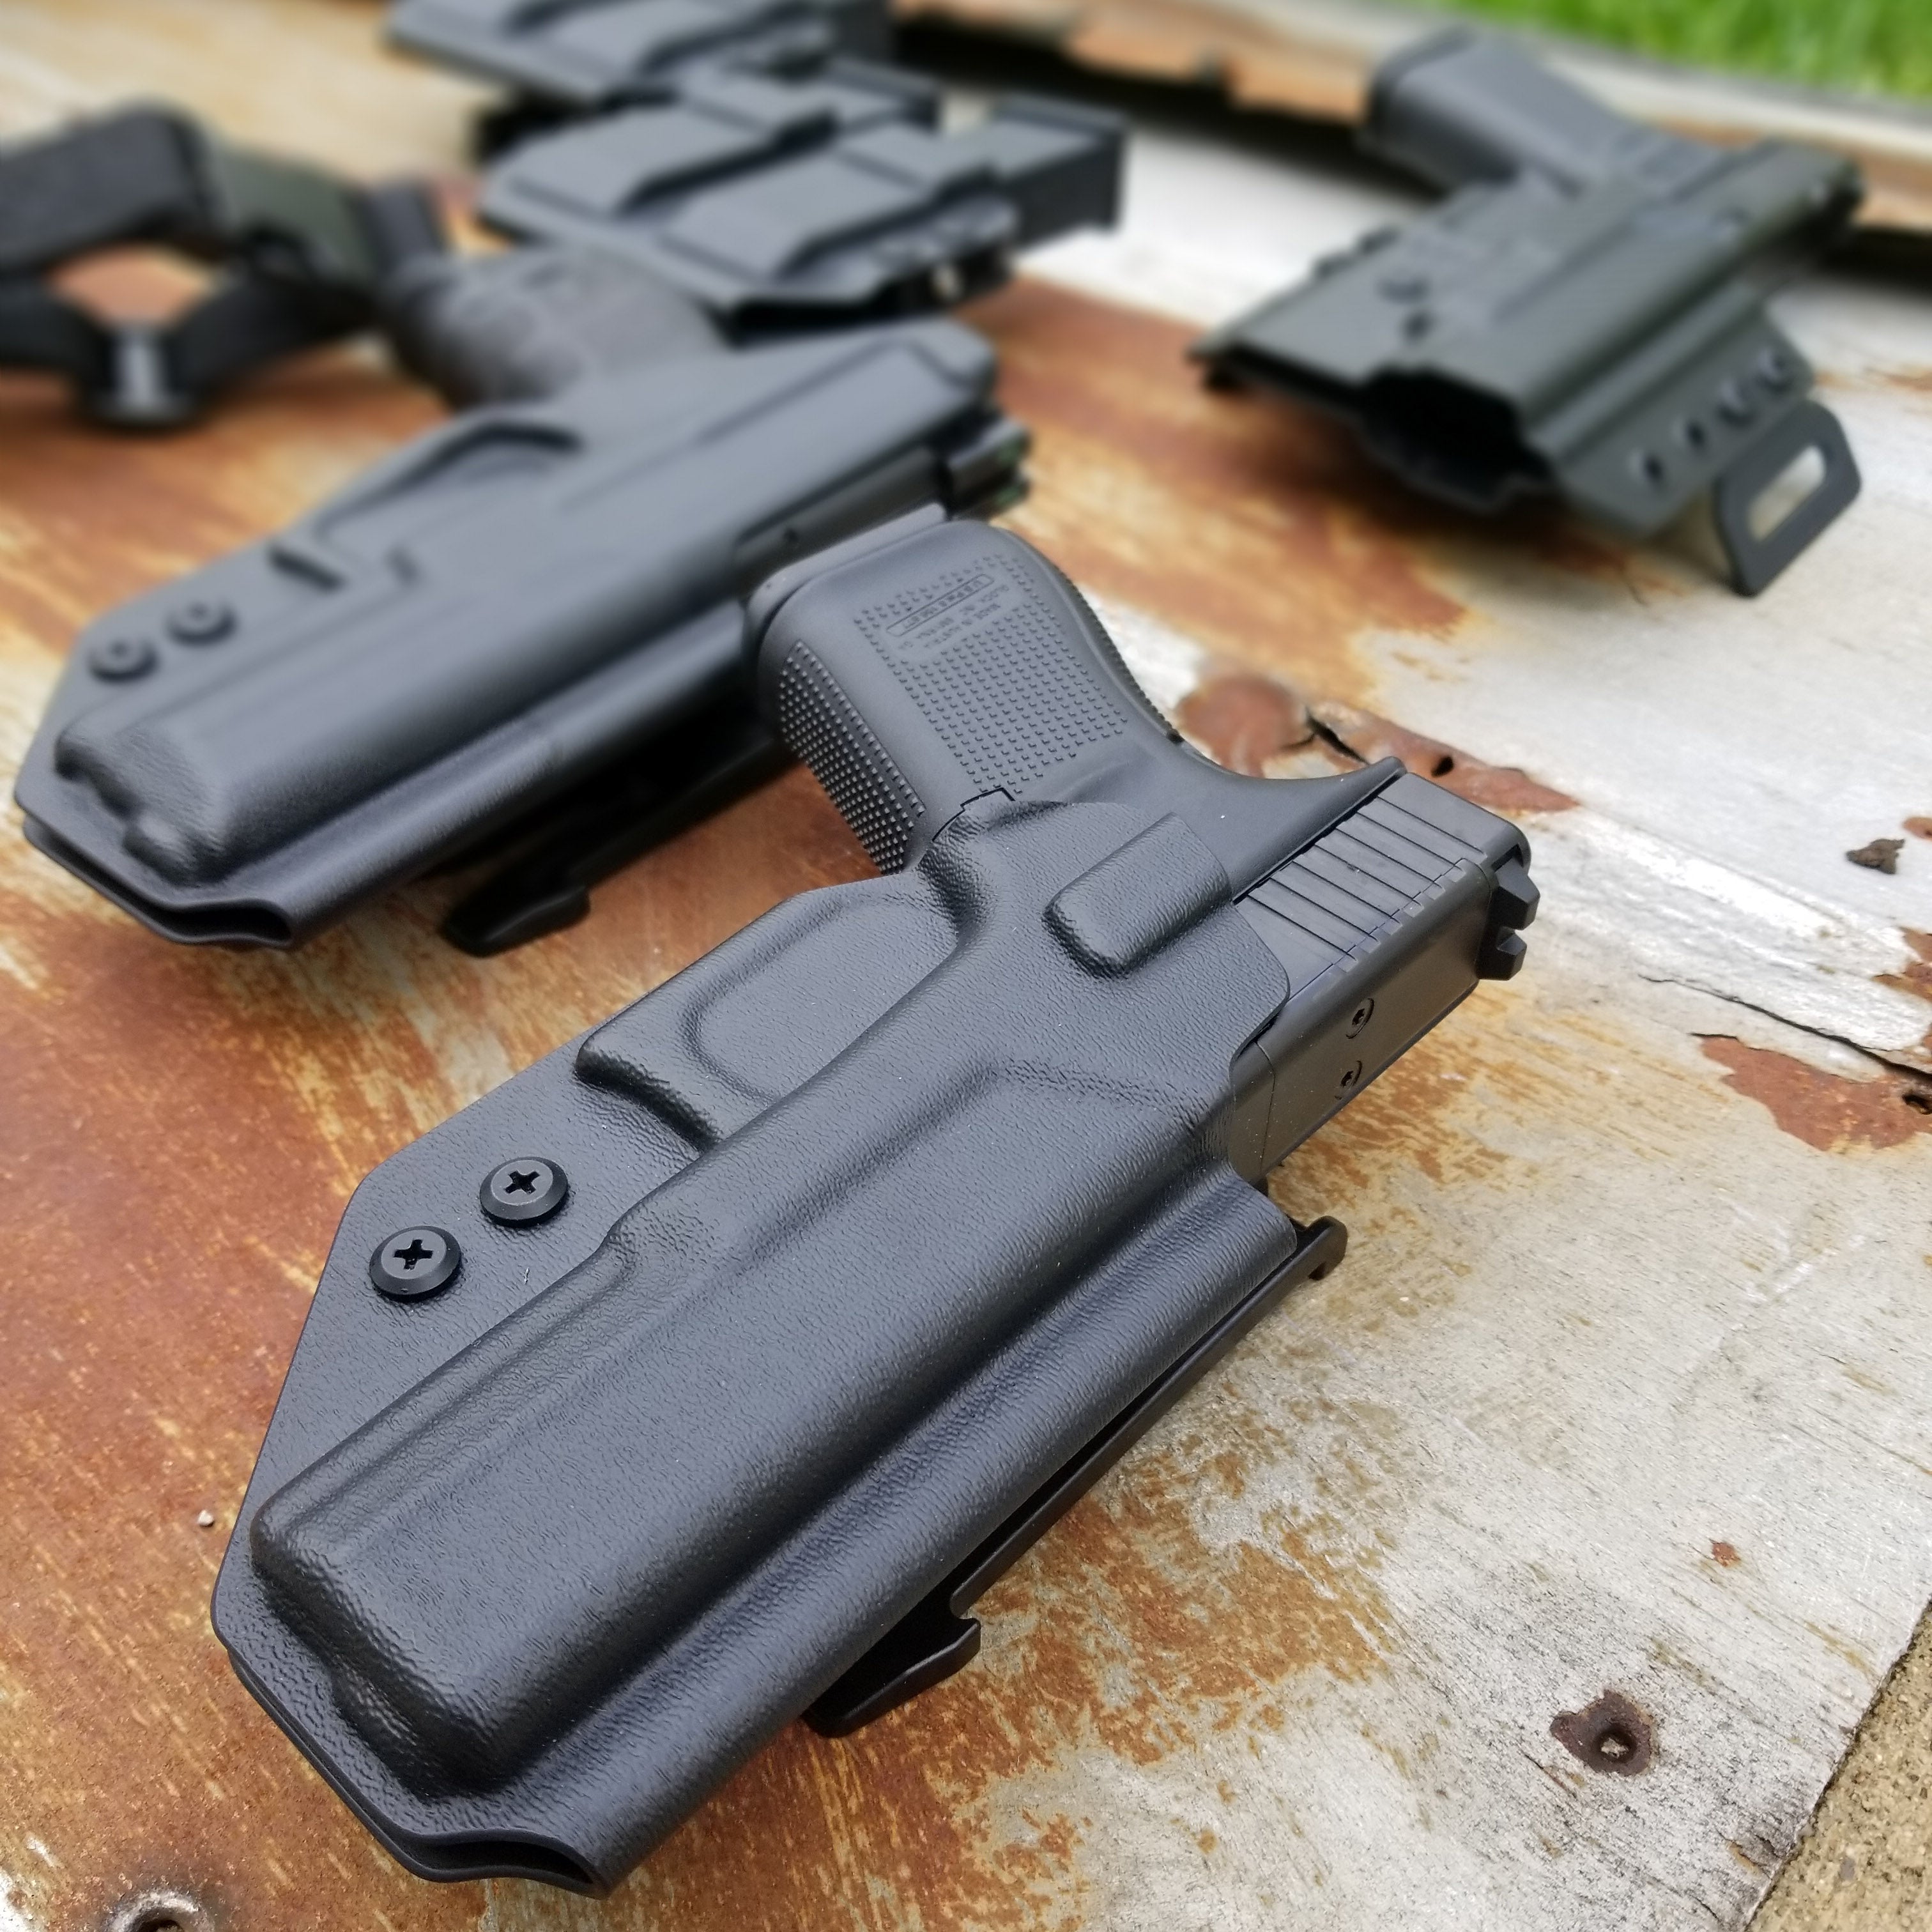 Glock 19 Gen 4 vs Gen 5: Which Glock Is Right For You?– Bravo Concealment